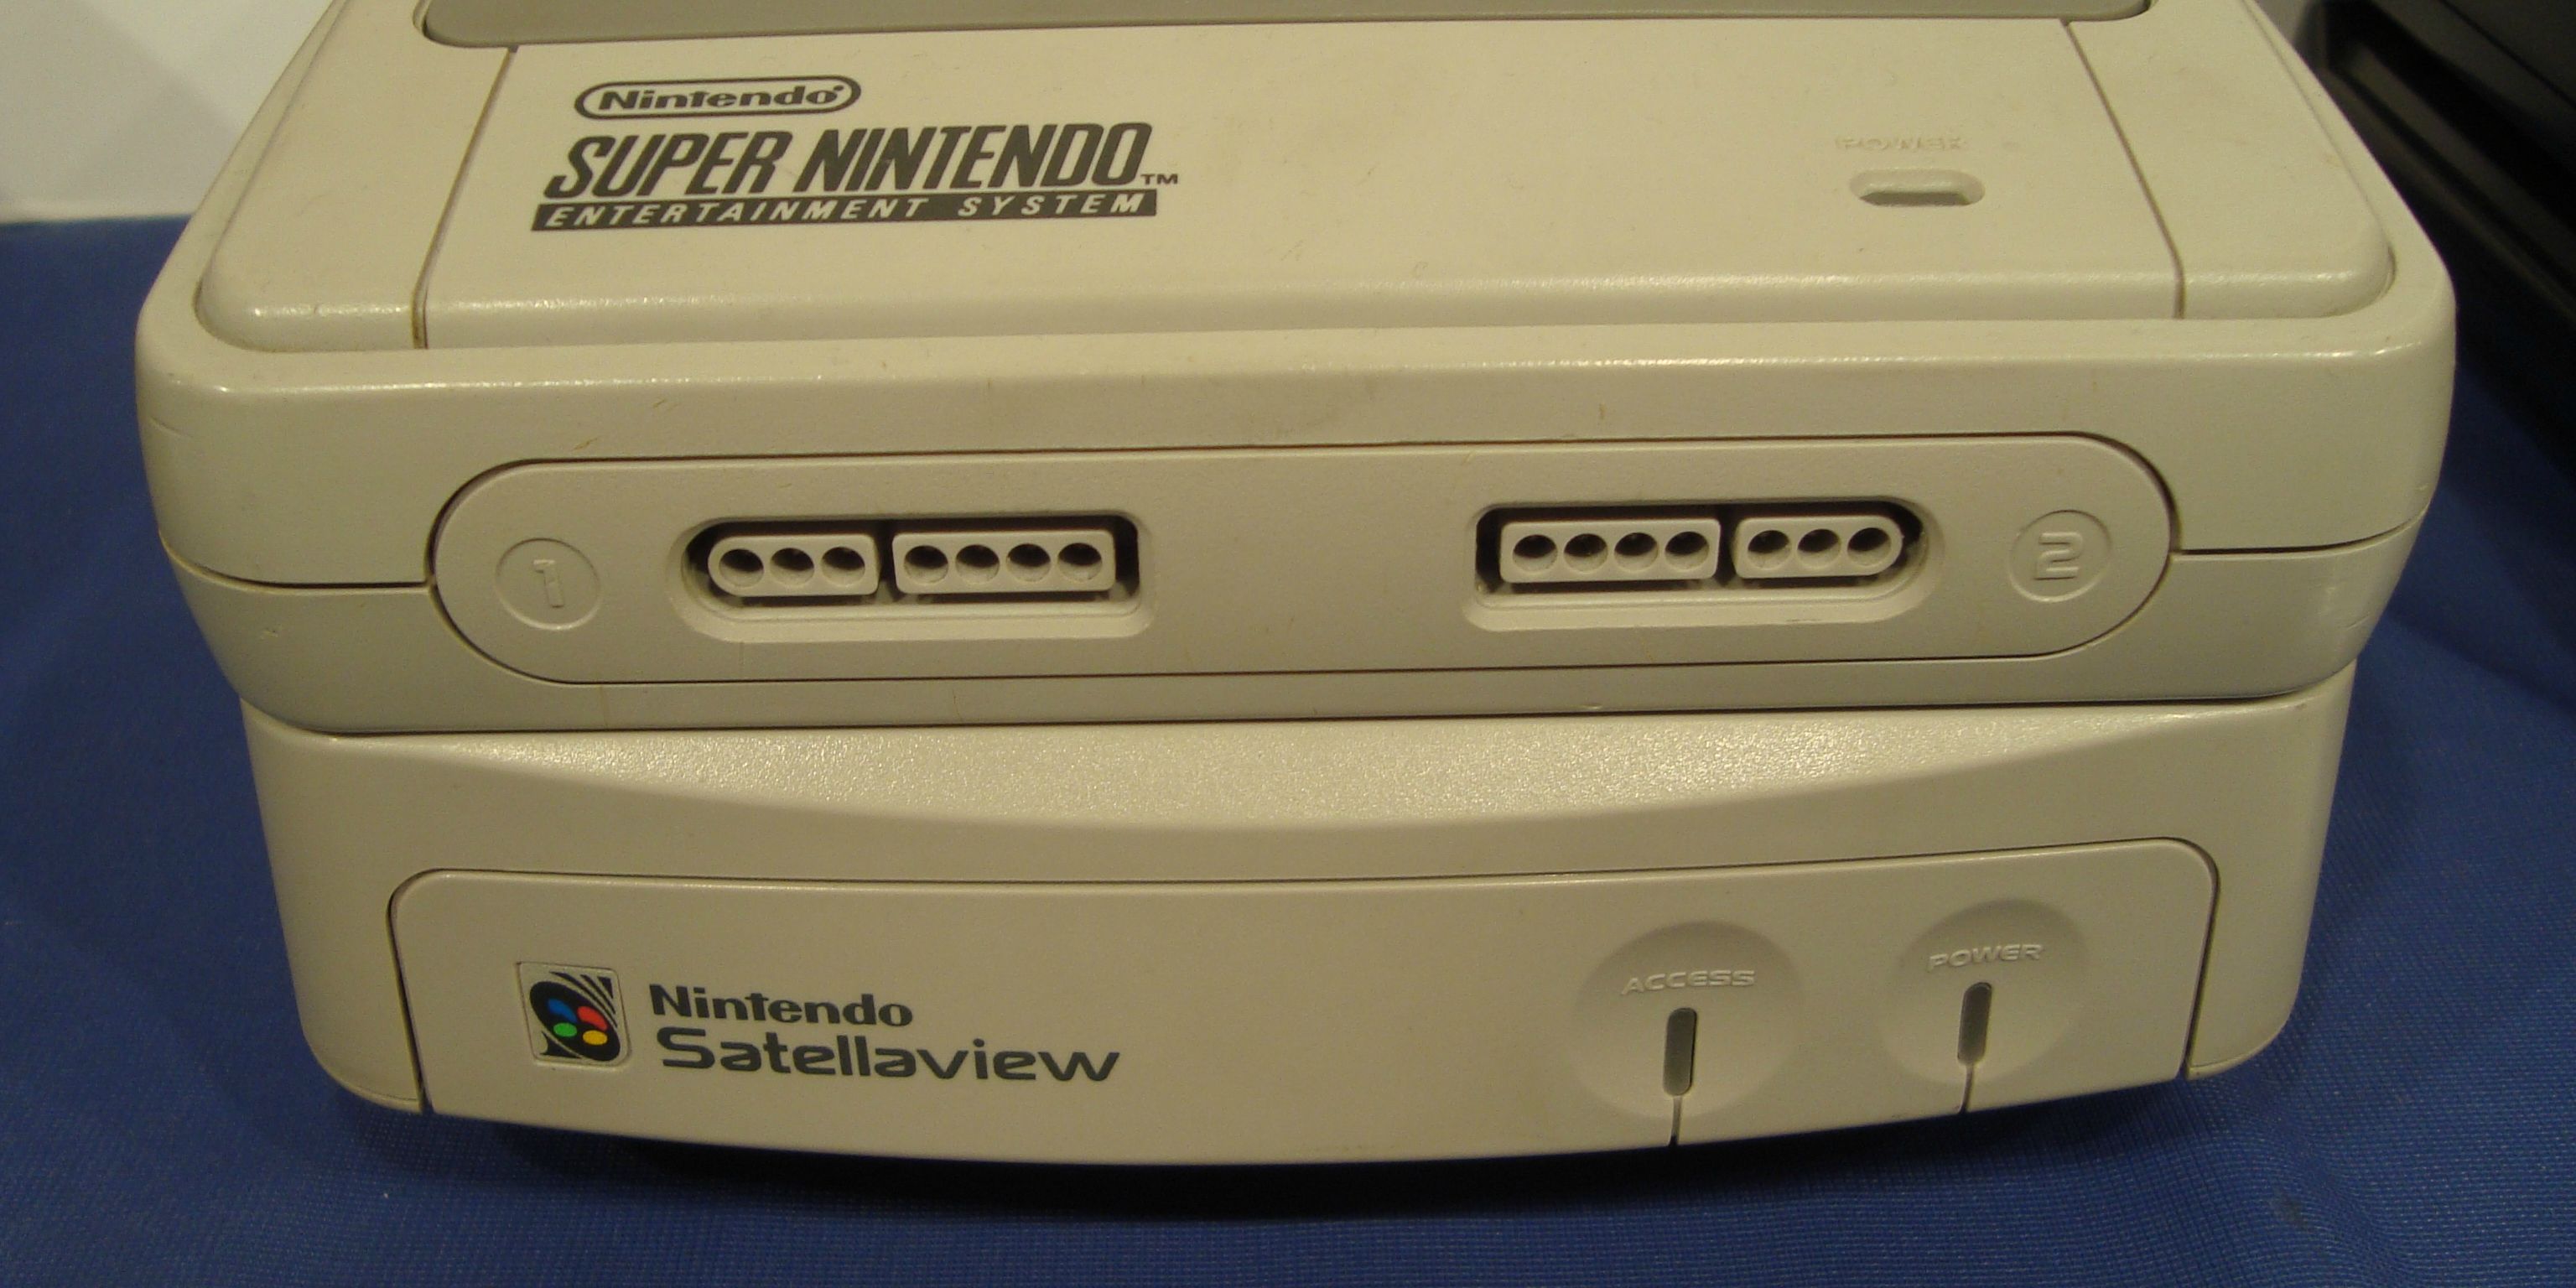 SNES with Satellaview Add-On